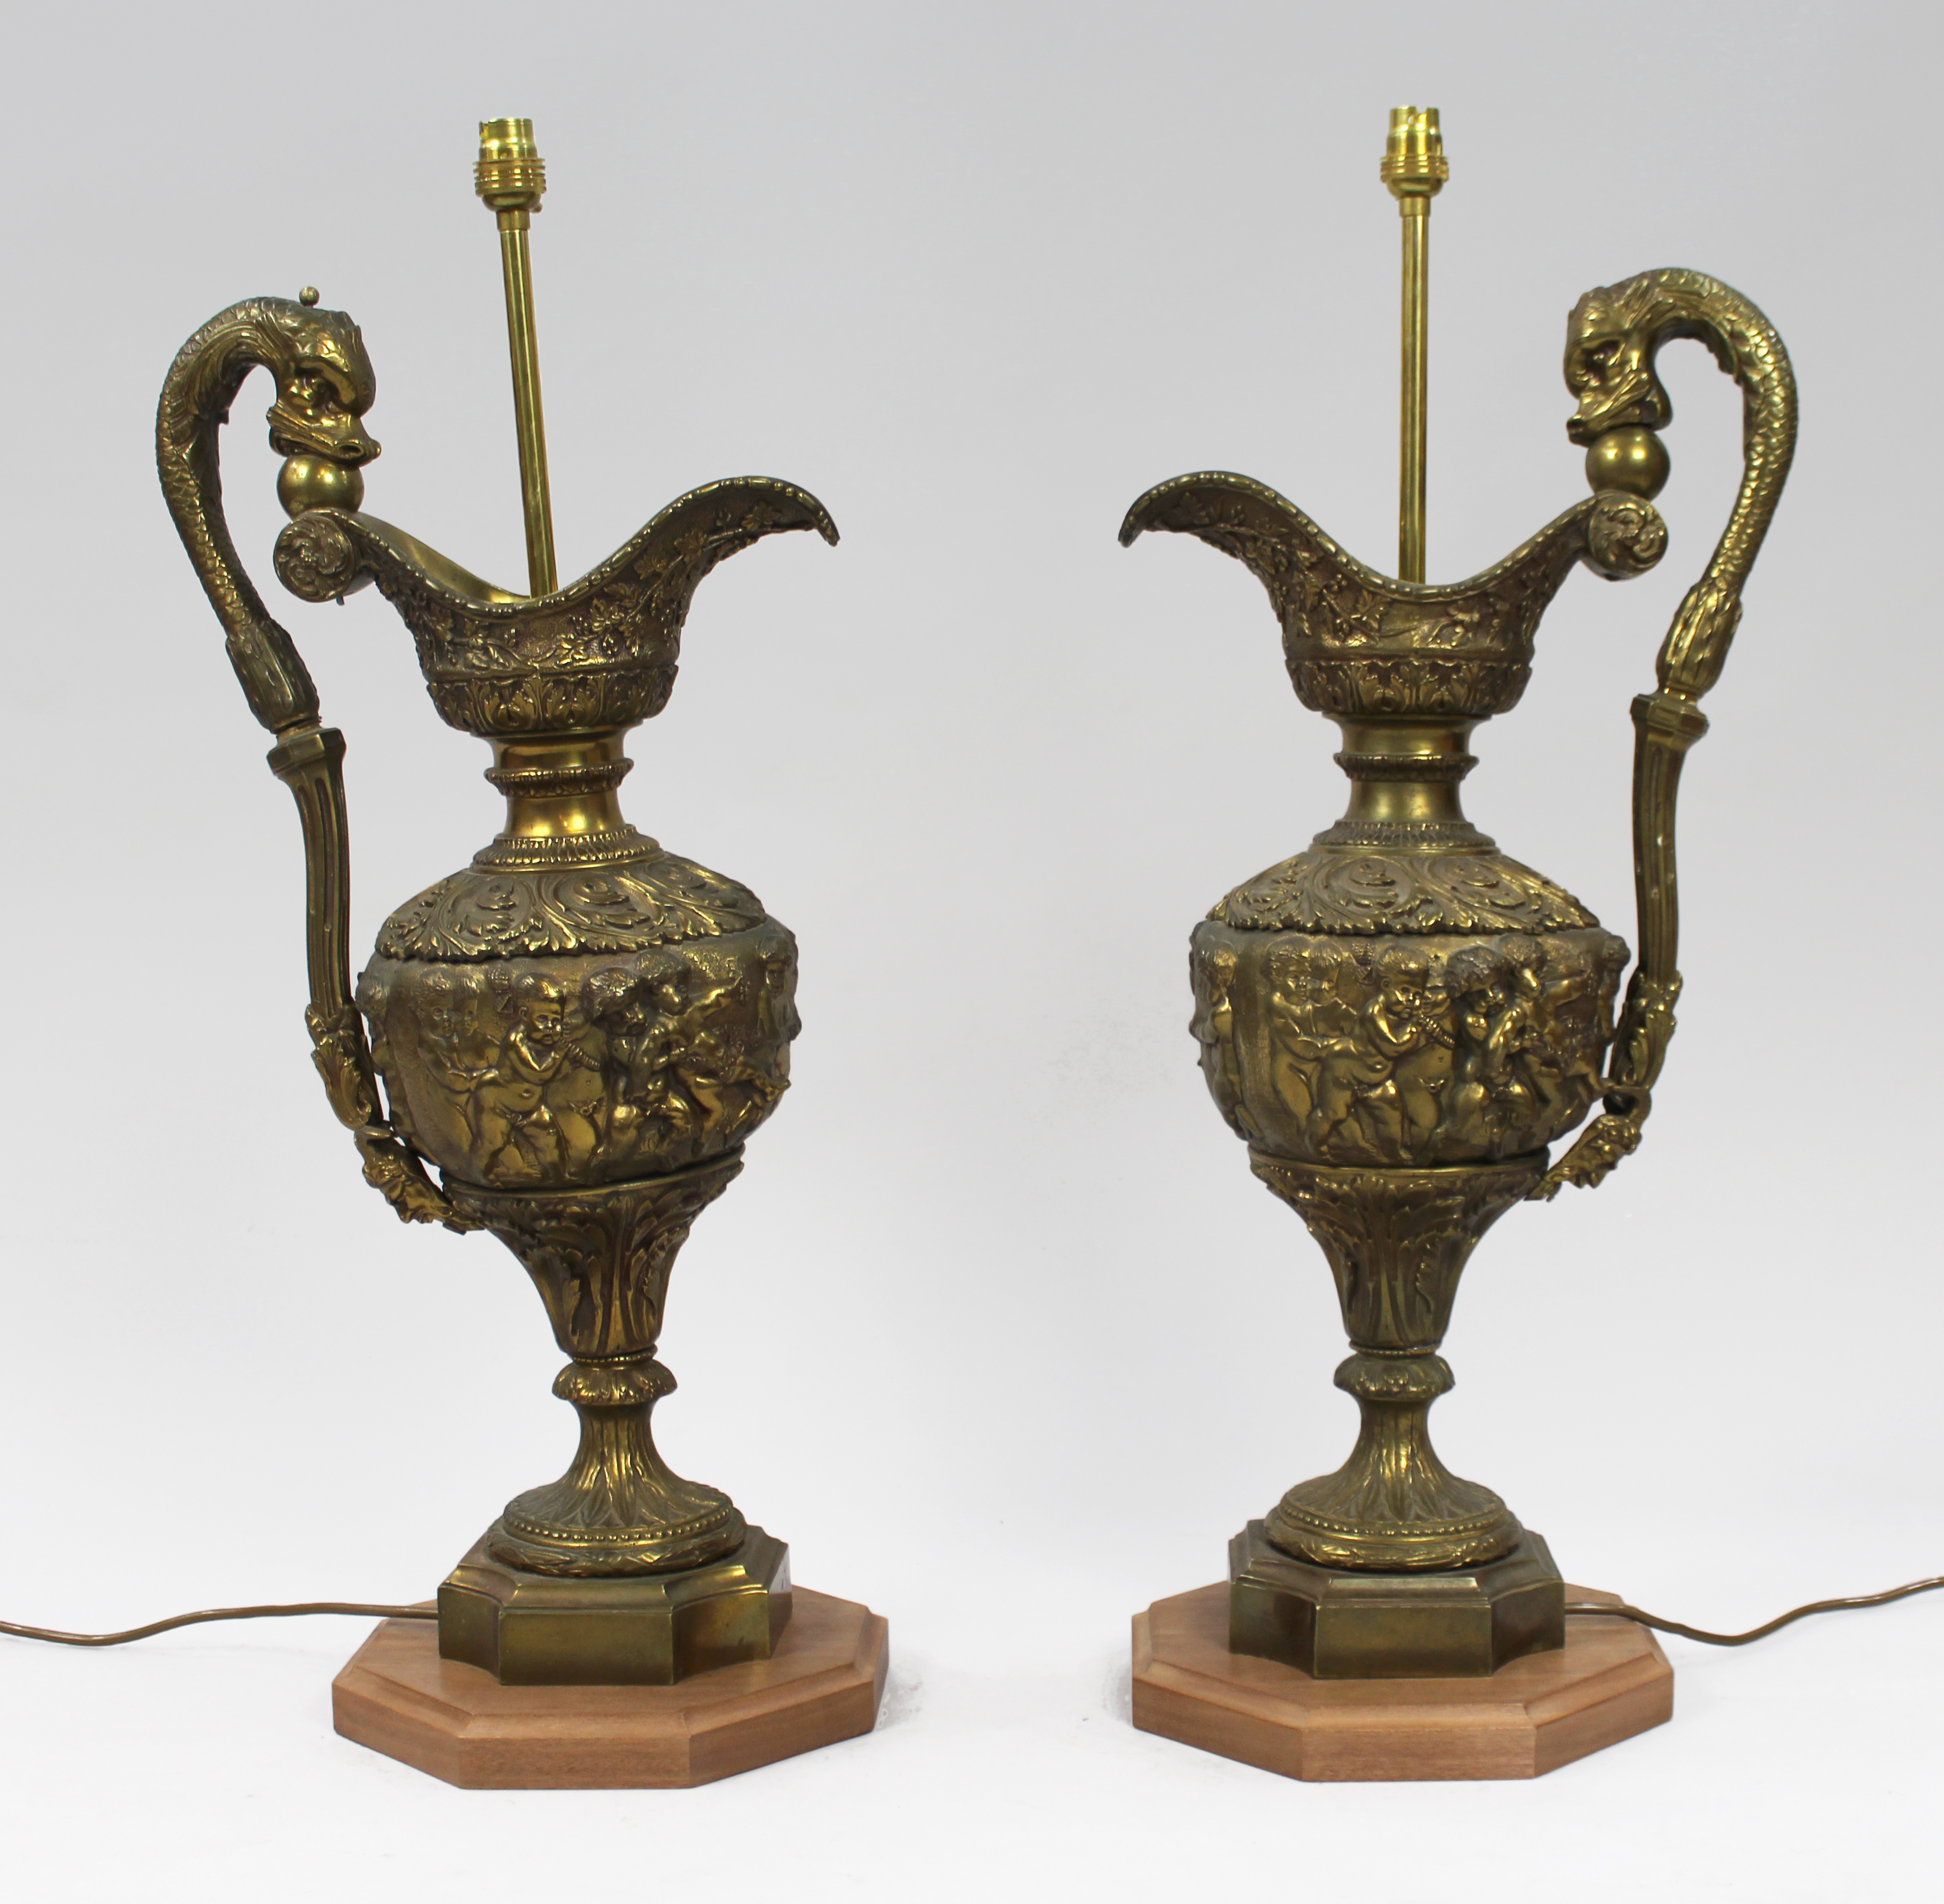 Pair of Large 19th c. Brass Ewer Table Lamps